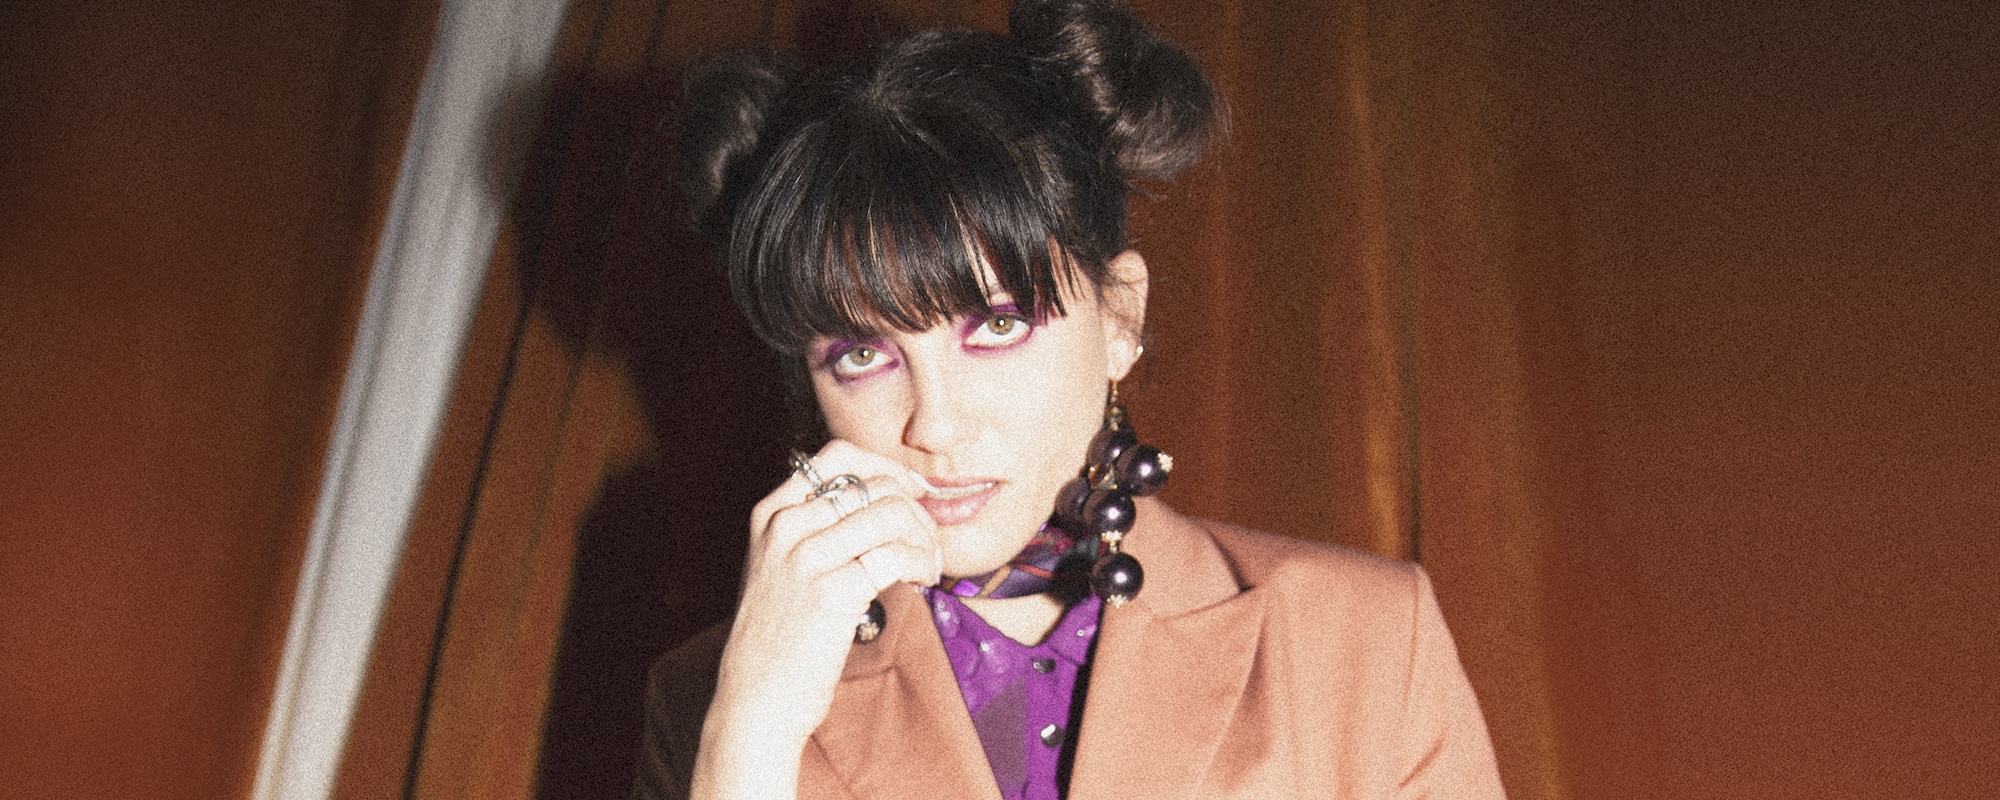 Meet Noga Erez, the Tel Aviv Musician Turning Her Anxiety Into Catchy, Colorful Flows